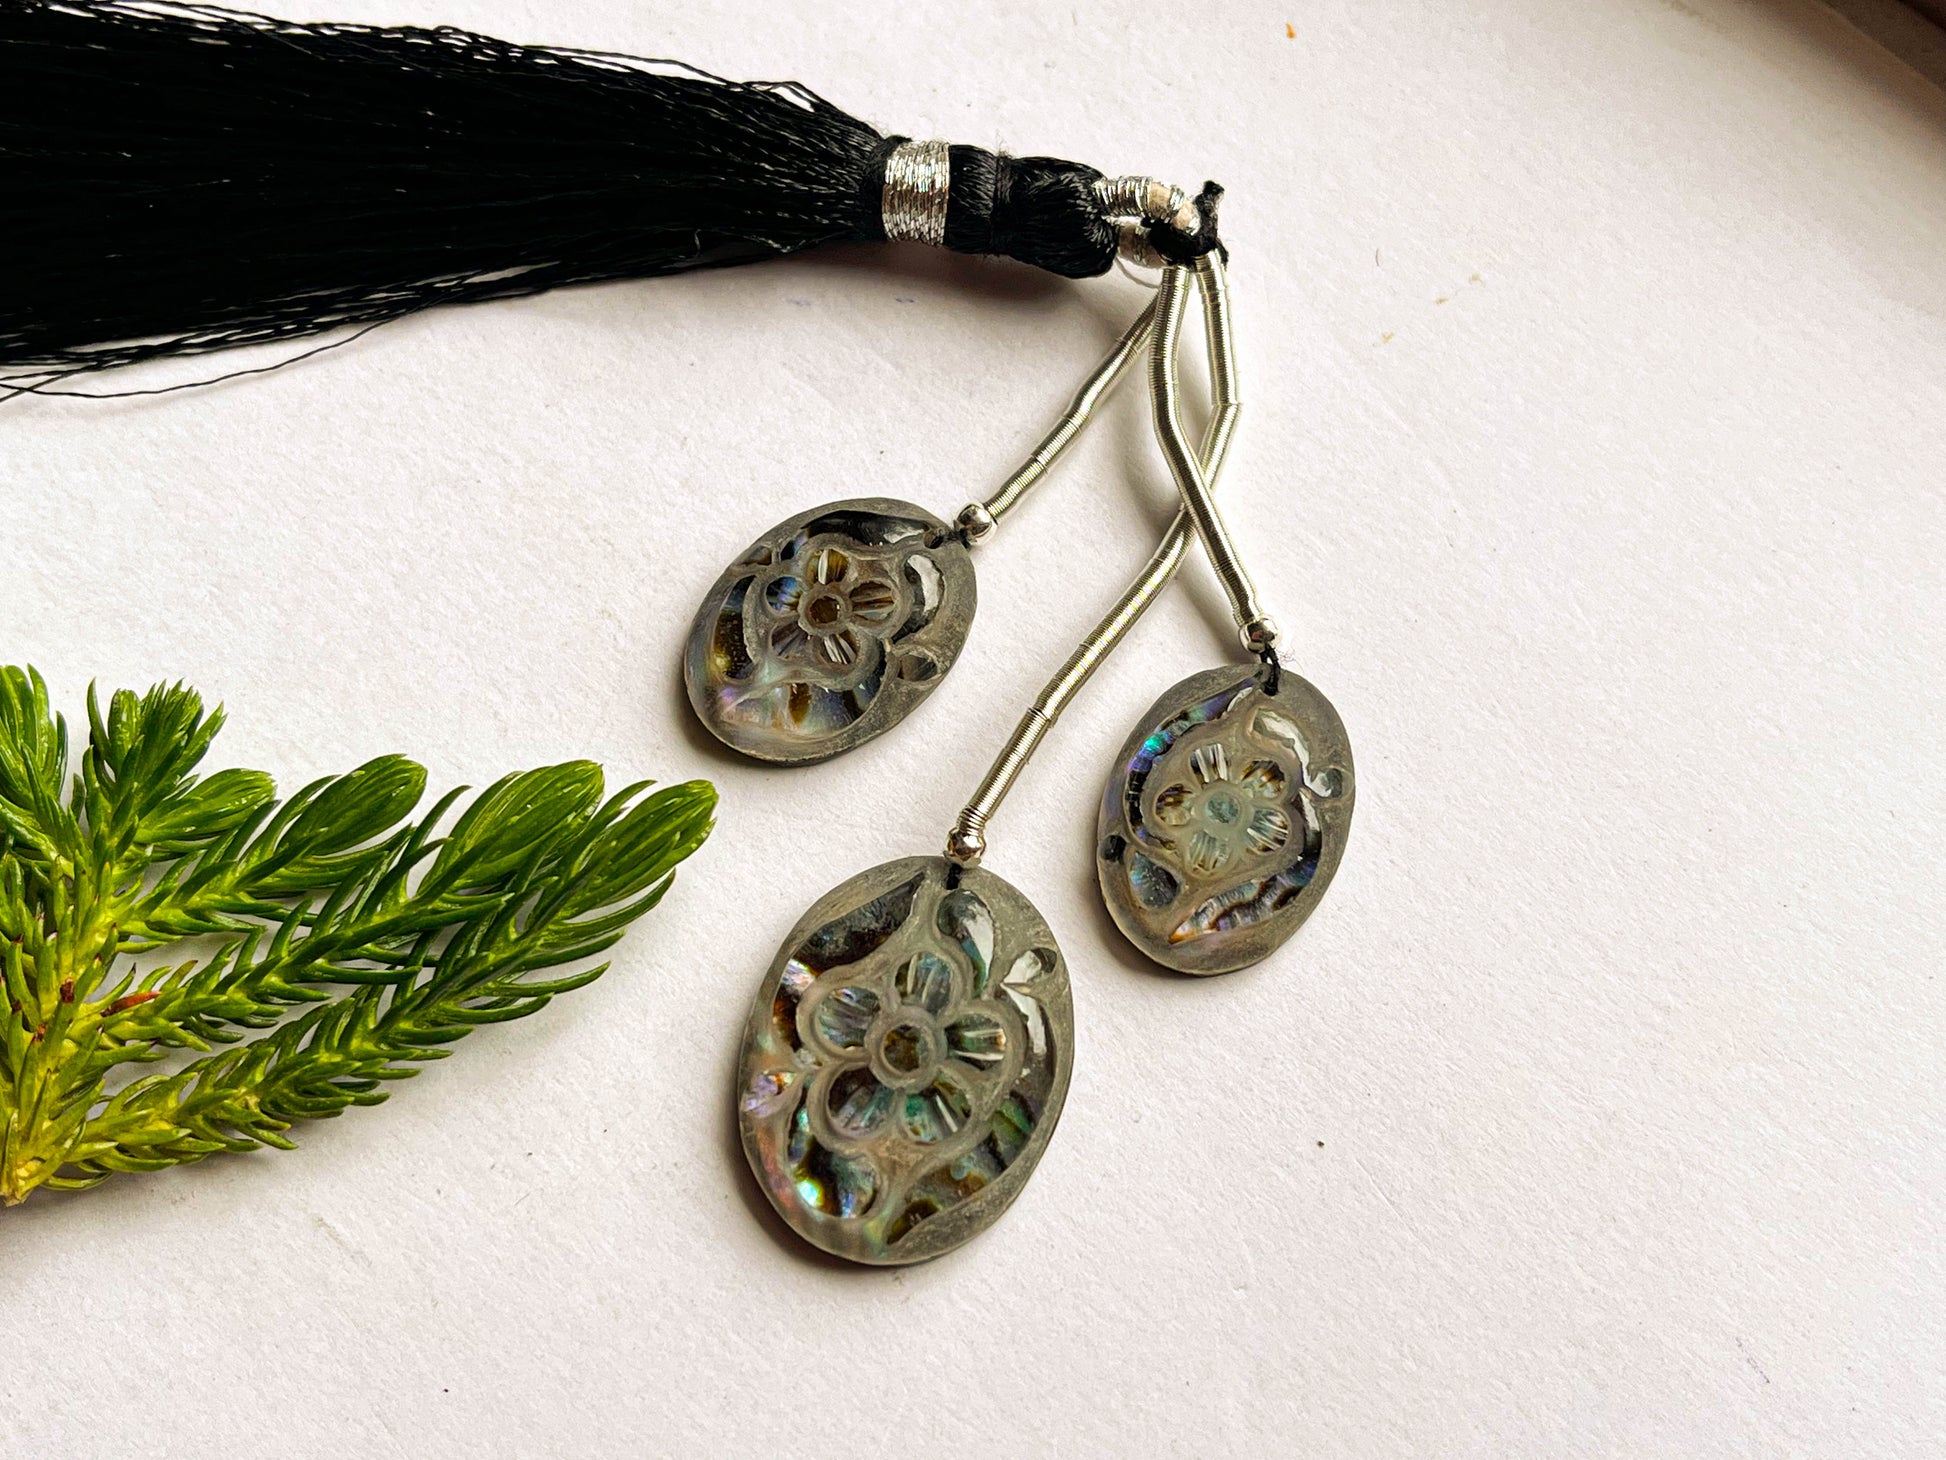 Abalone Shell & Crystal Cameo Doublet Briolette Beads, Abalone Shell Carving, Frosted Crystal Carving, Abalone Shell Carving Beads A129 Beadsforyourjewelry